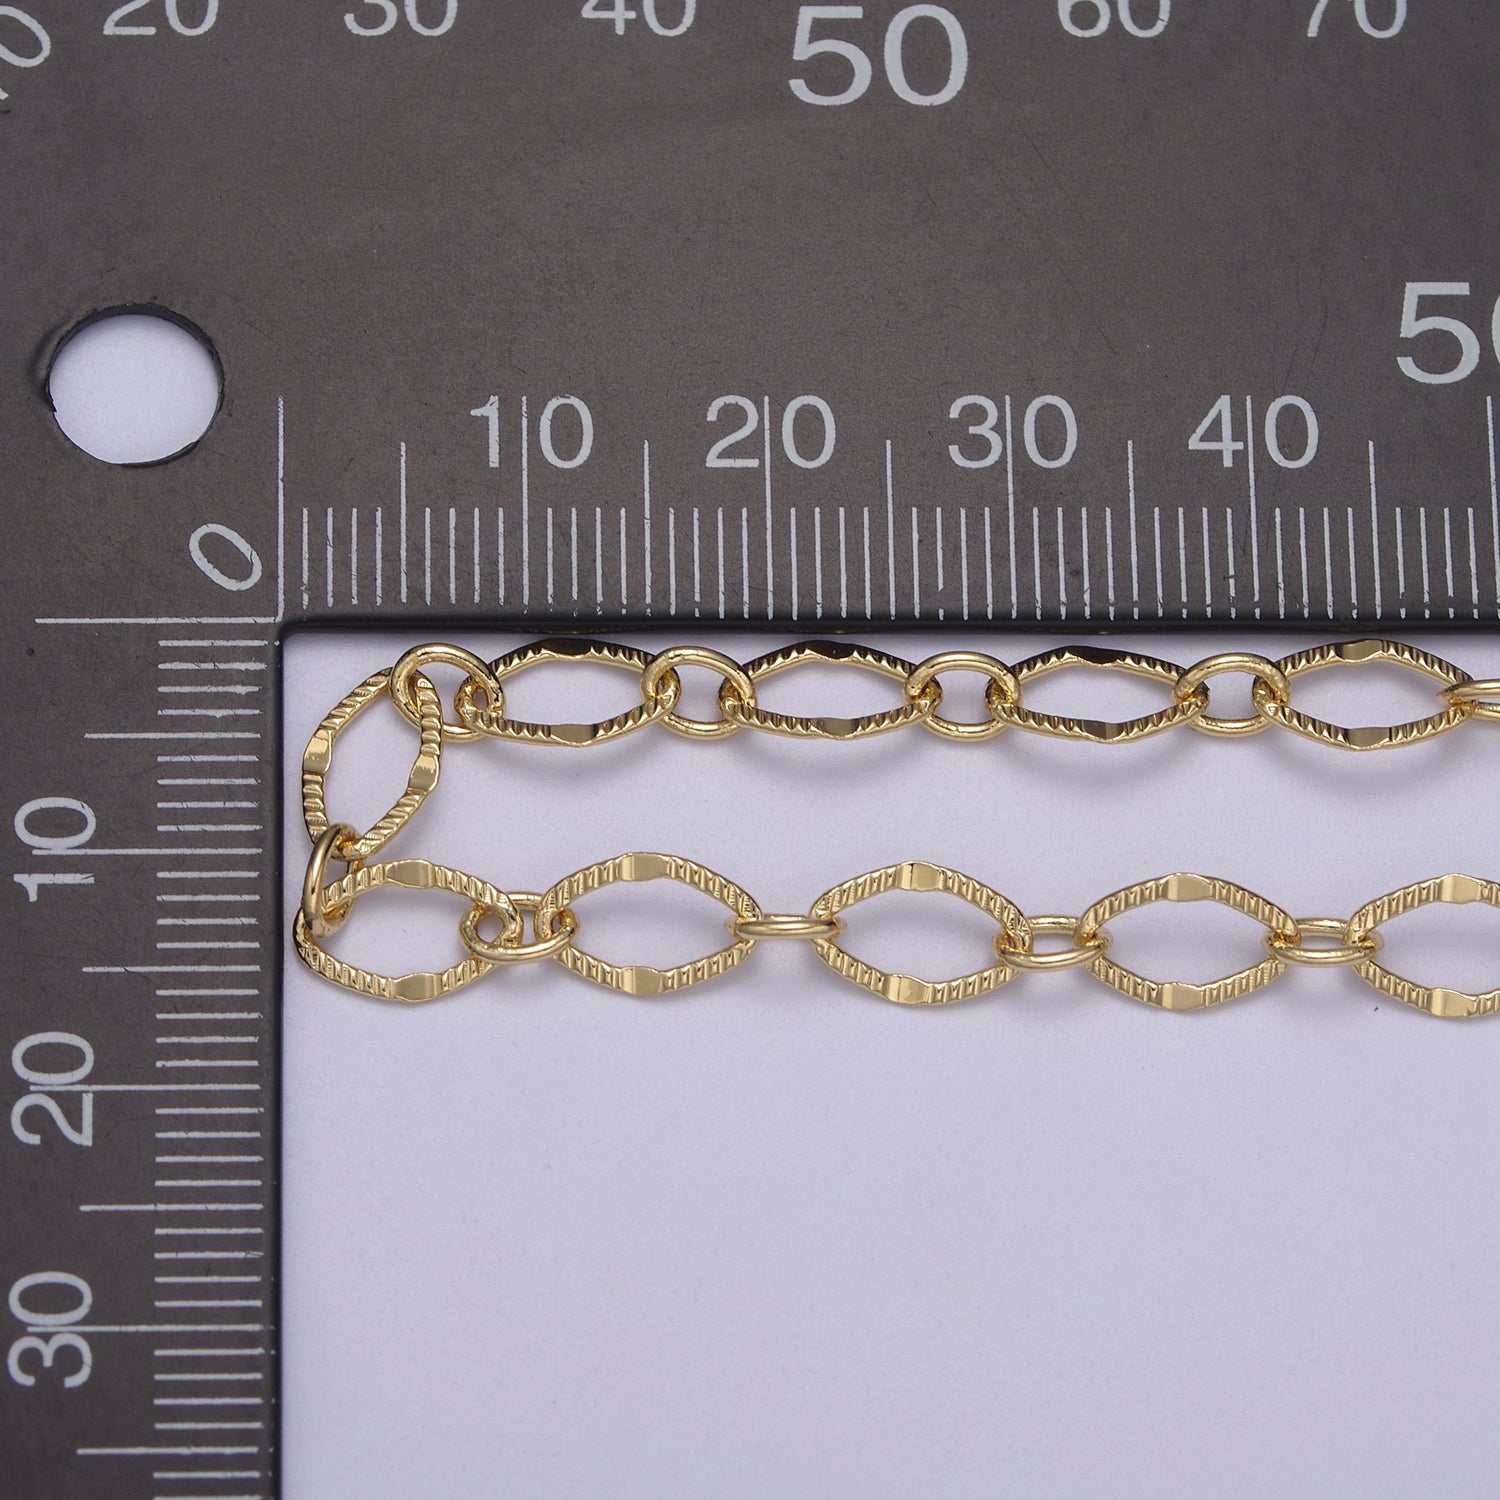 6mm Width Textured Cable Chain, 24K Gold Filled and Silver Unique Cable Wholesale Bulk Chain For Jewelry Making | ROLL-596, ROLL-597 - DLUXCA